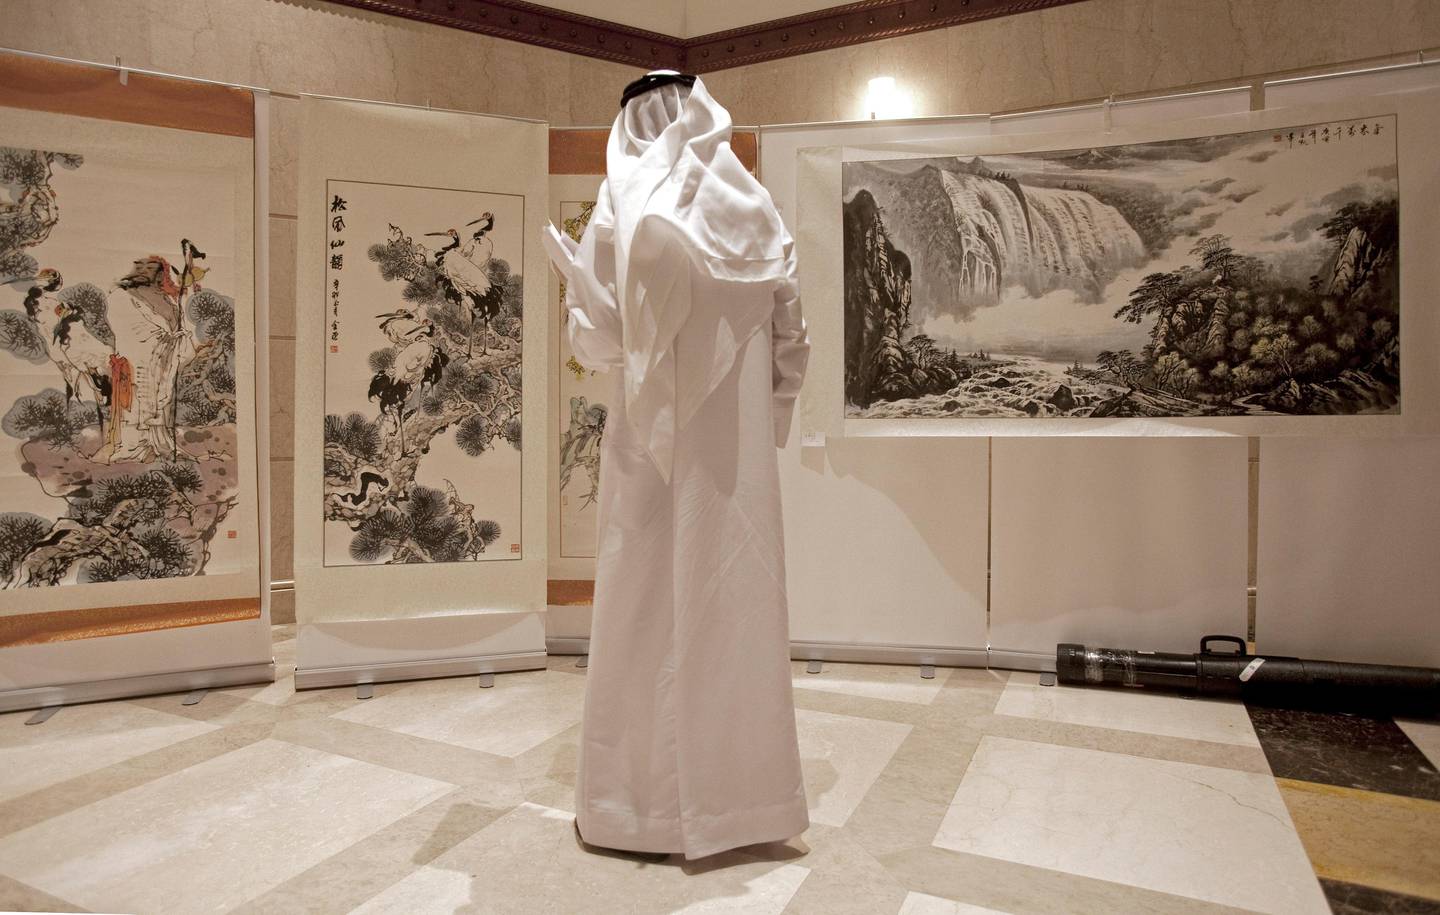 Dubai, March 23, 2011 - Ahmed Al Amiri looks an exhibit of Chinese drawings during the opening of the Confucius Institute a the University of Dubai in Al Mamzar, Dubai, March 23, 2011. (Jeff Topping/The National)